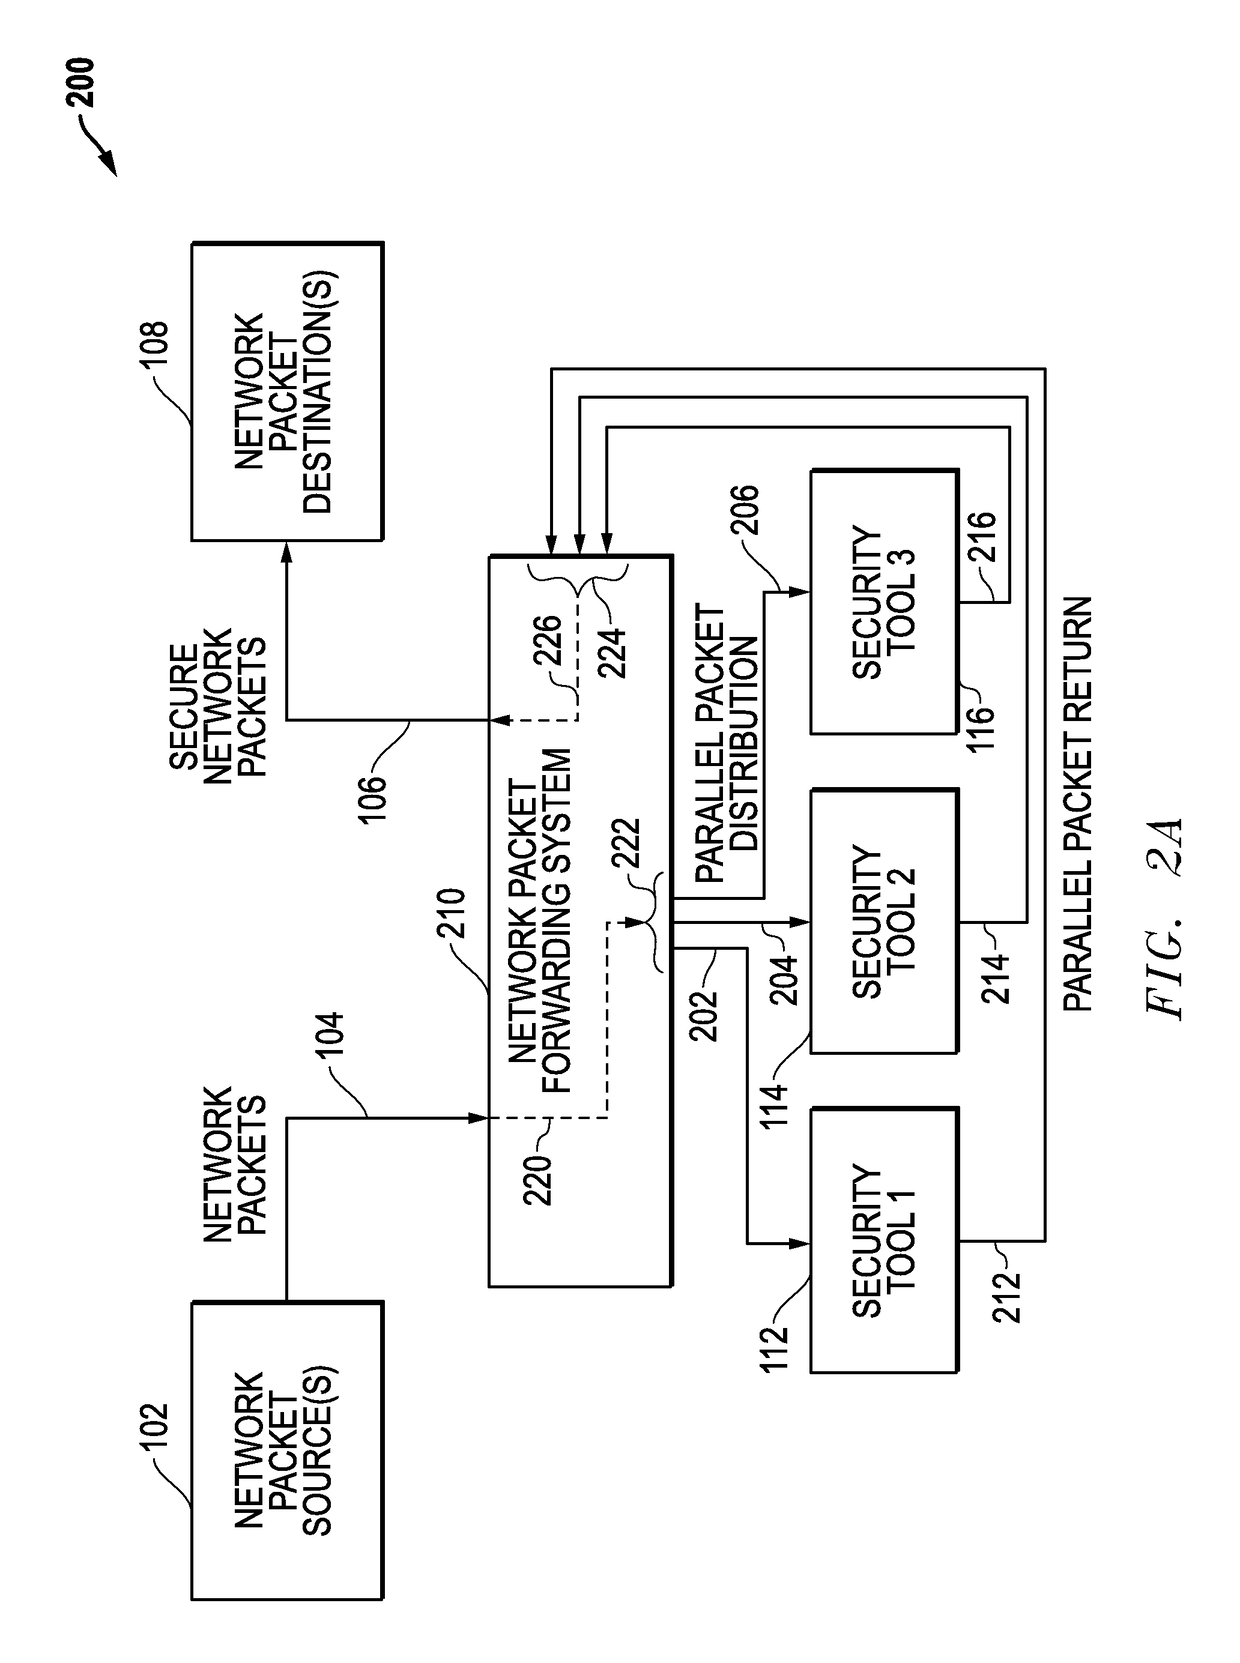 Latency-based timeouts for concurrent security processing of network packets by multiple in-line network security tools